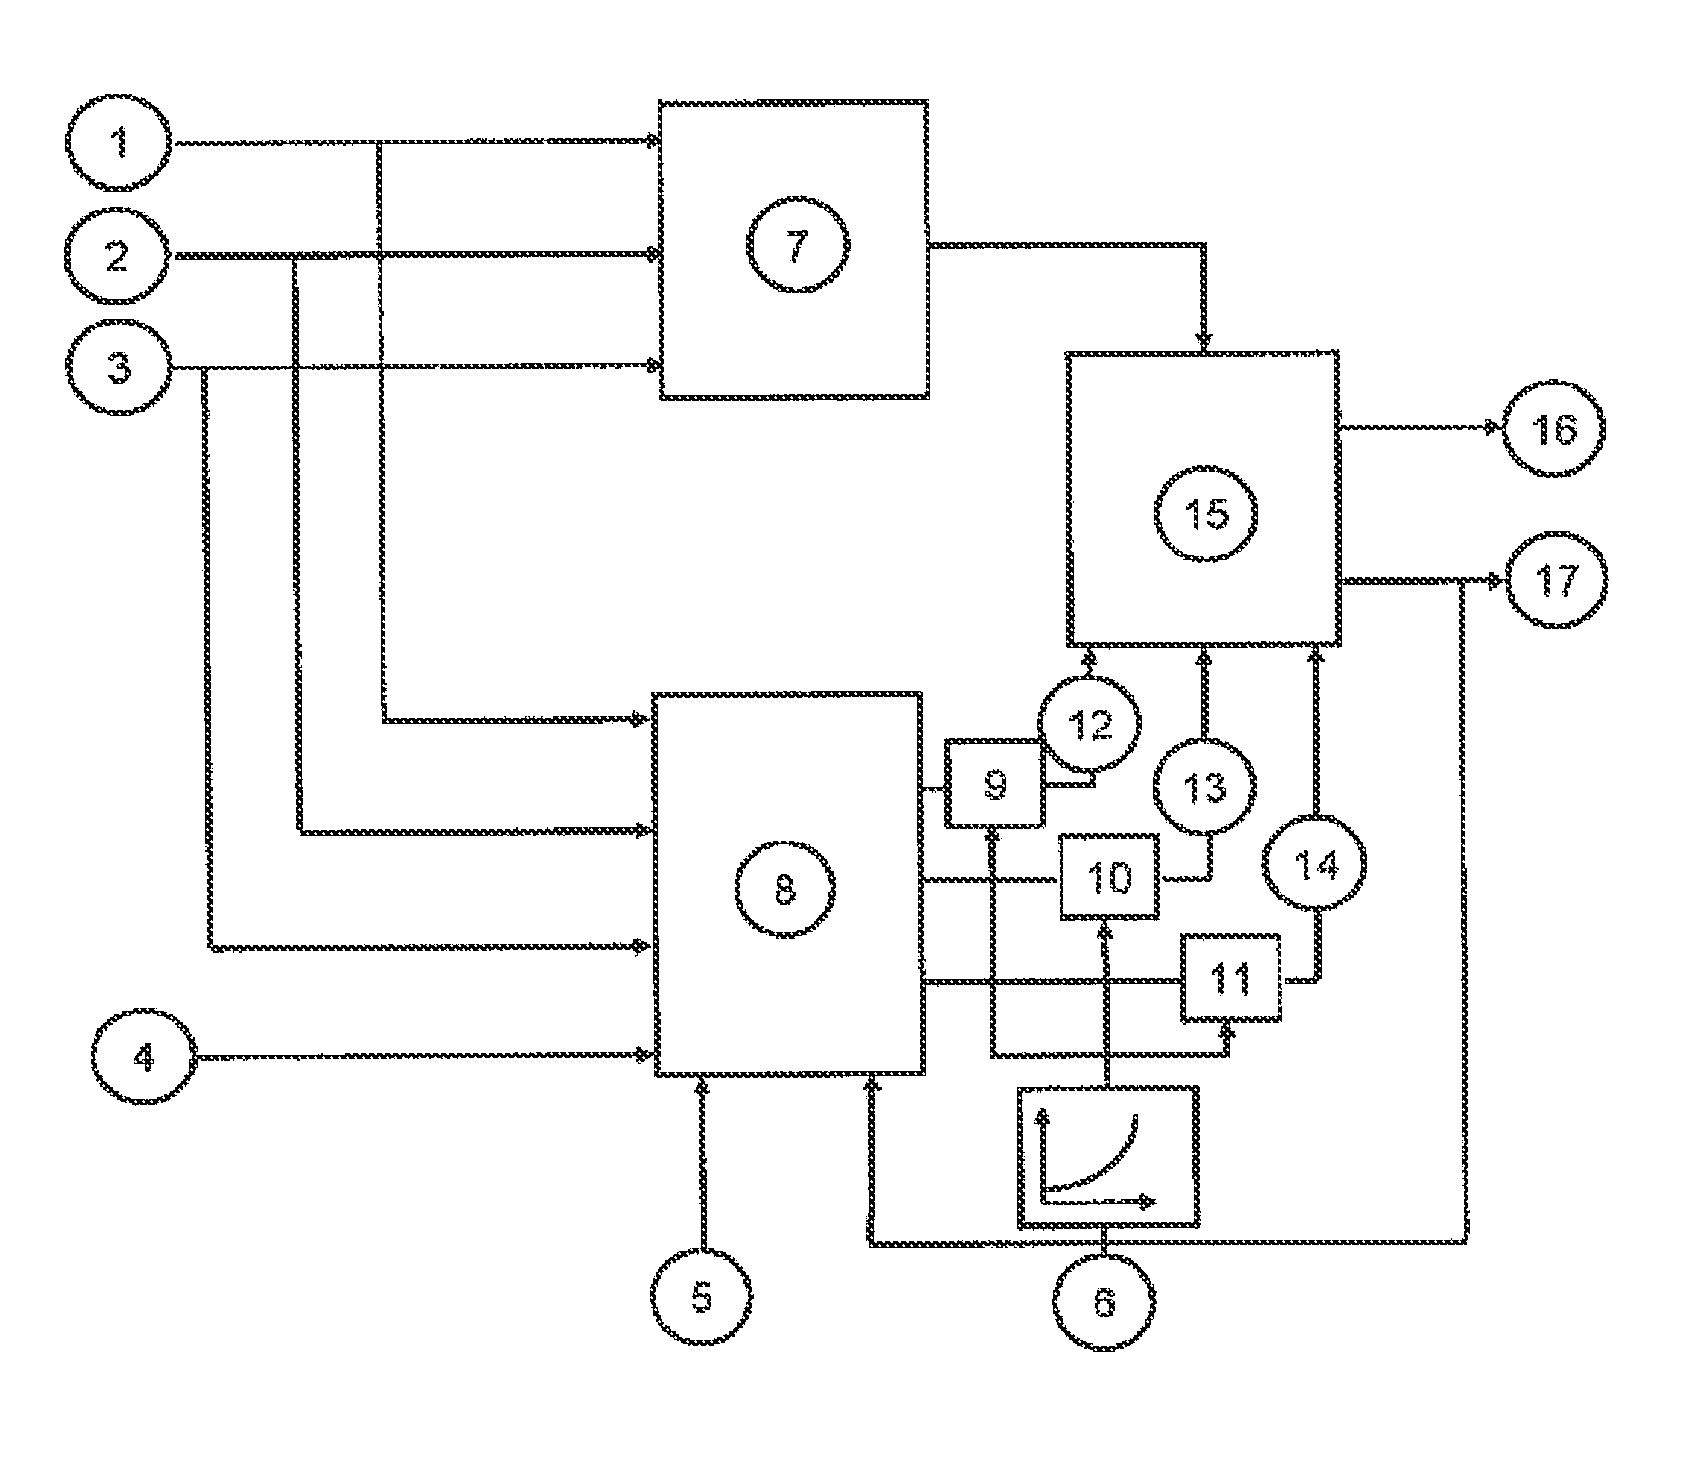 Method for controlling an automated clutch or automated transmission or a drive unit in a vehicle